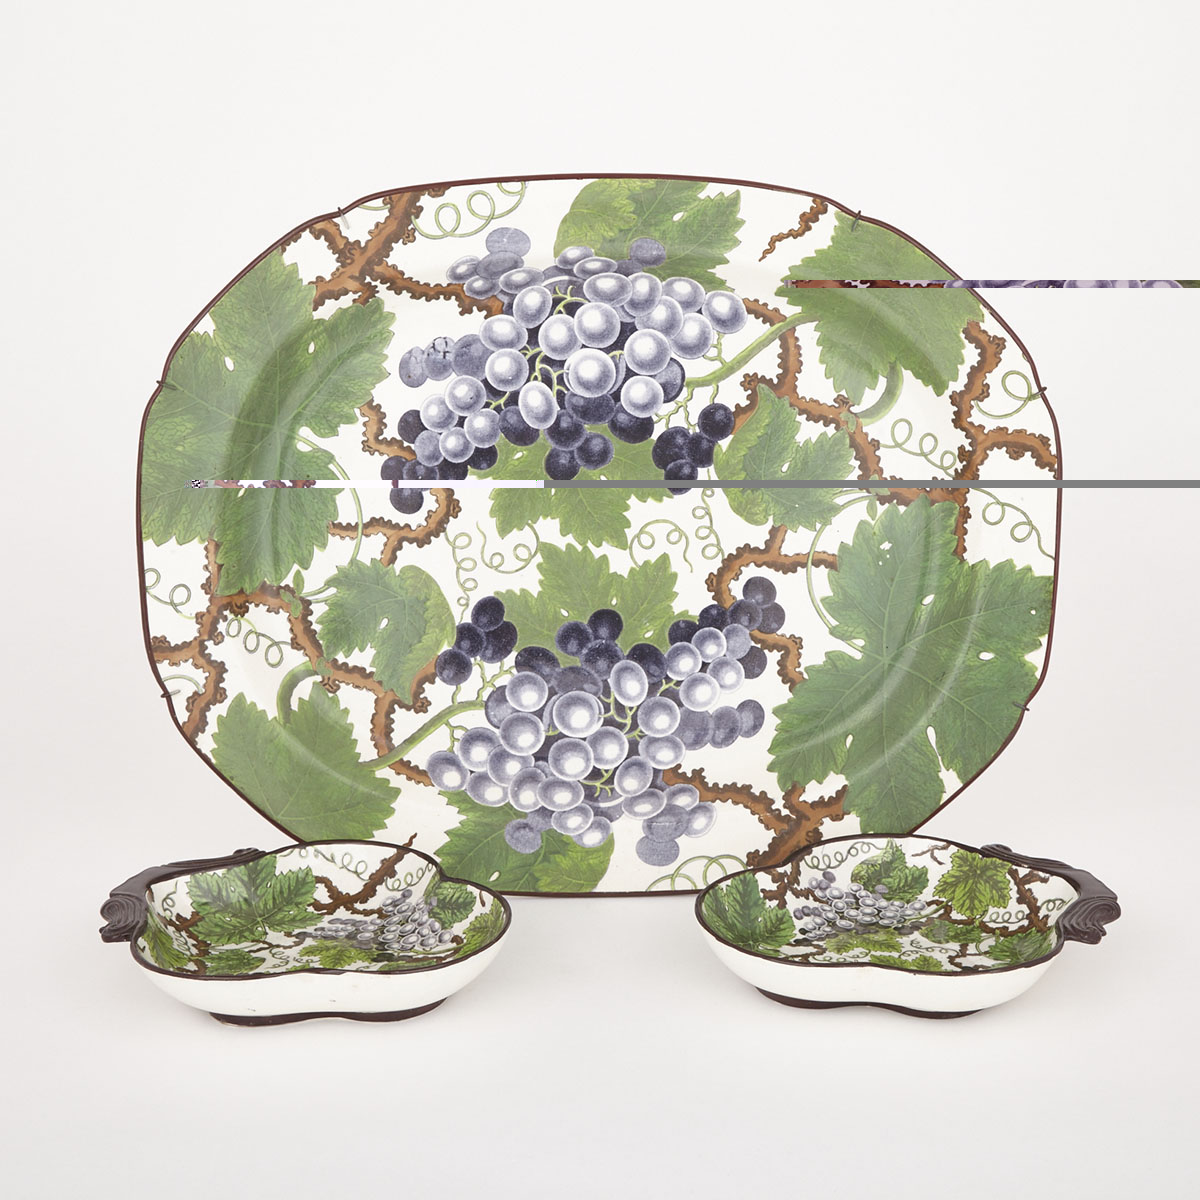 Spode Pearlware ‘Grape Vine’ Platter and Pair of Dishes, c.1820